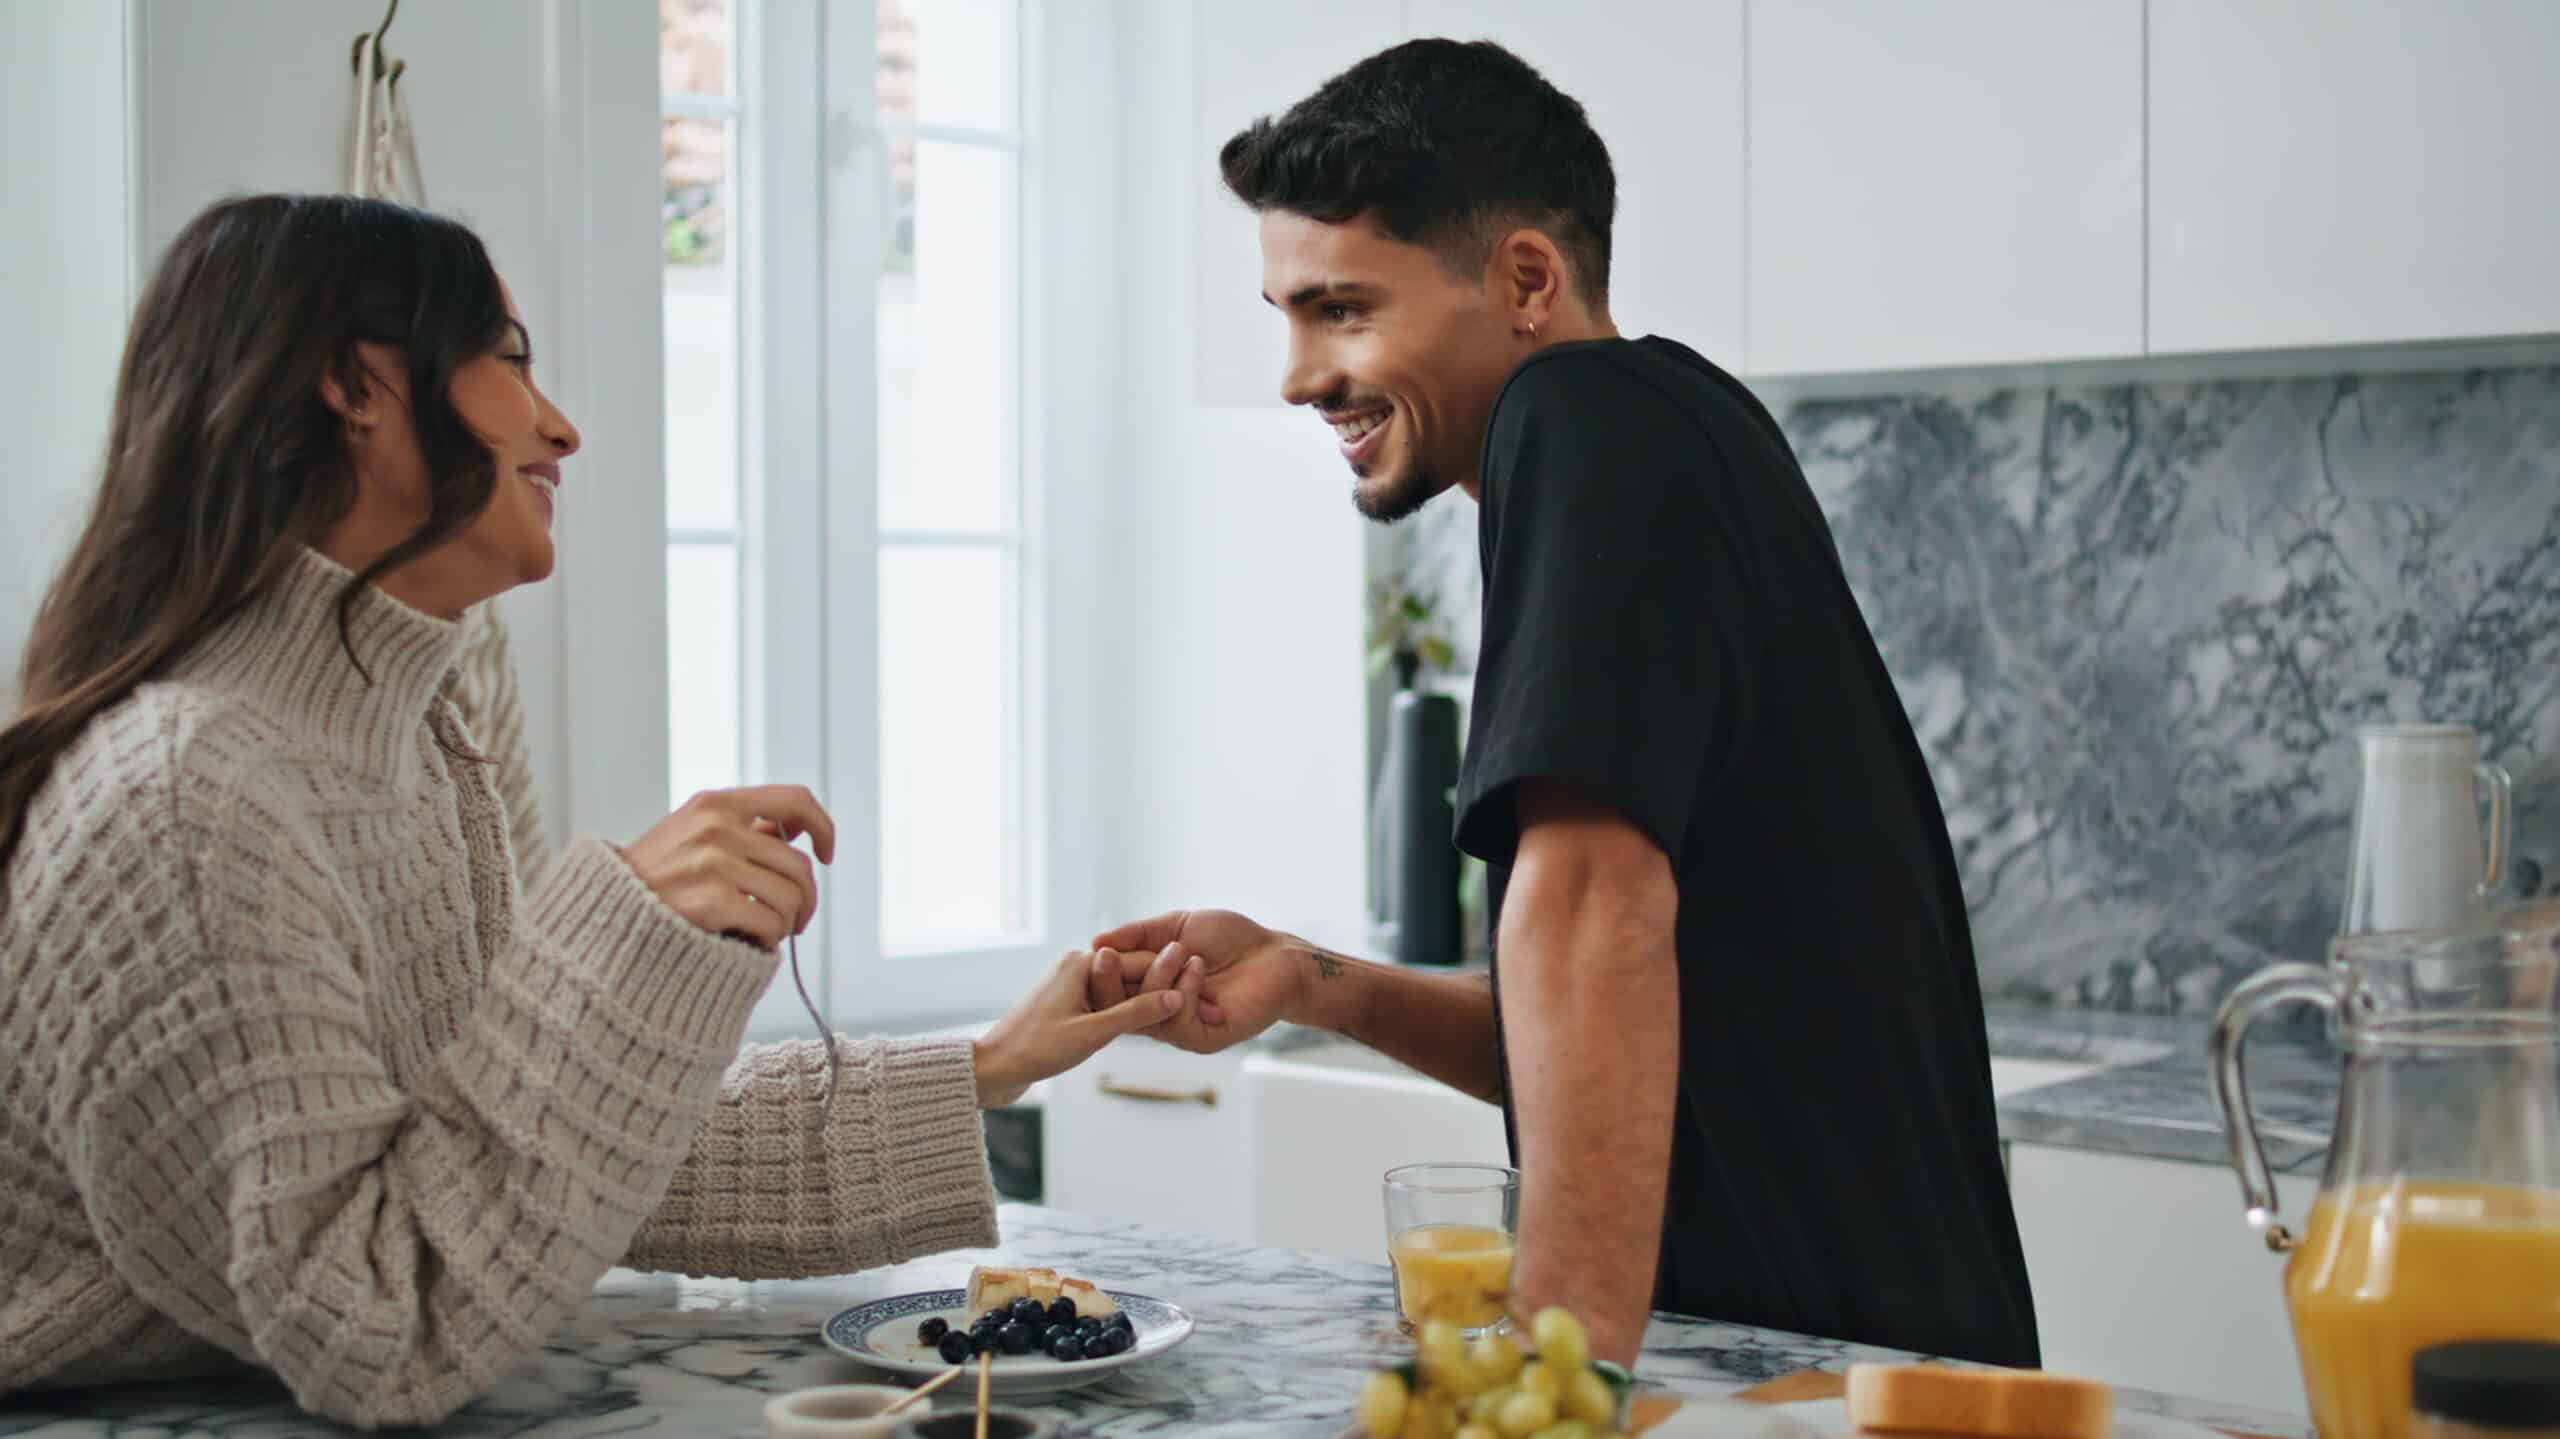 A man and woman hold hands across a countertop - How To Tell Your Spouse You're Getting Help For Substance Use